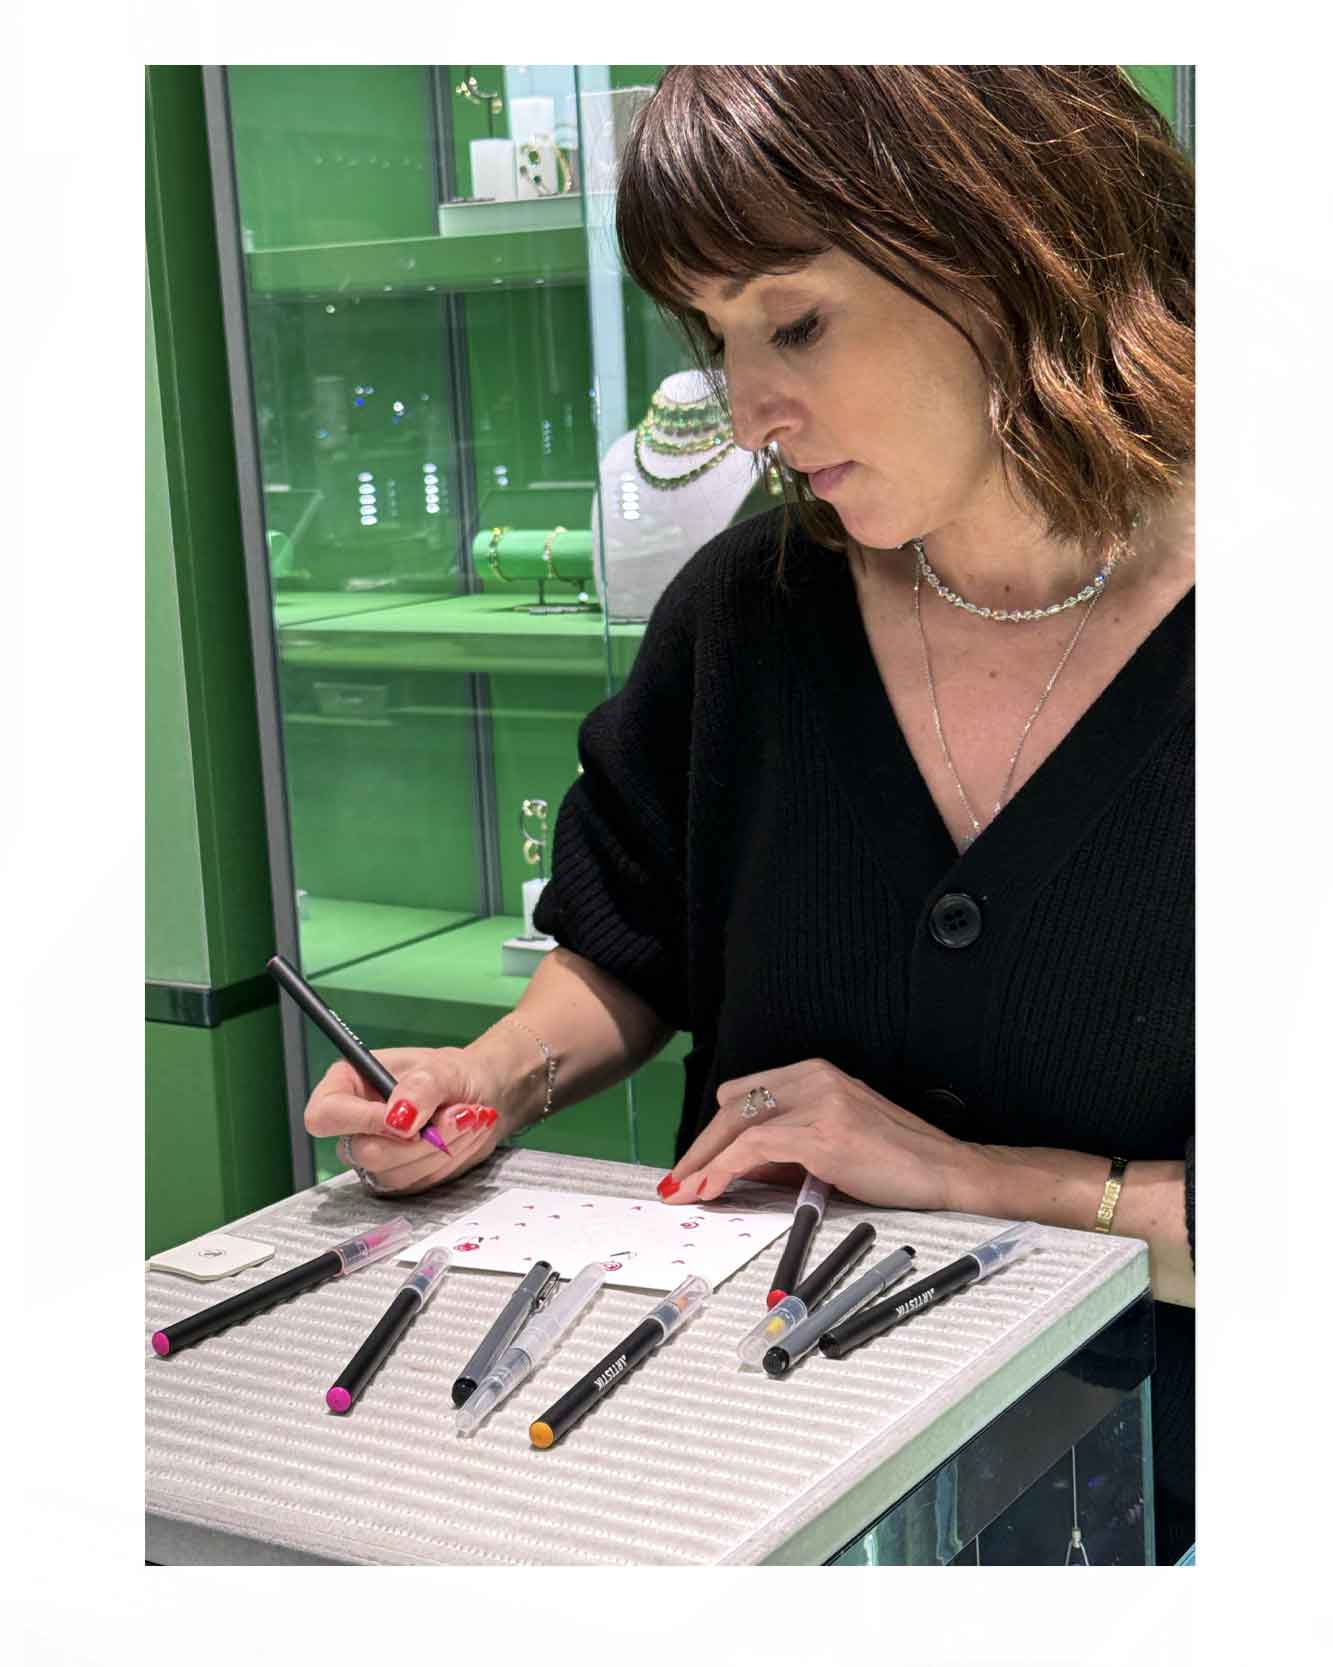 Drawing live for Valentines Day for Swarovski. Offering custimisation for customers. Drawing on packaging and on envelopes. Little roses hand drawn with love hearts along with hand written notes.